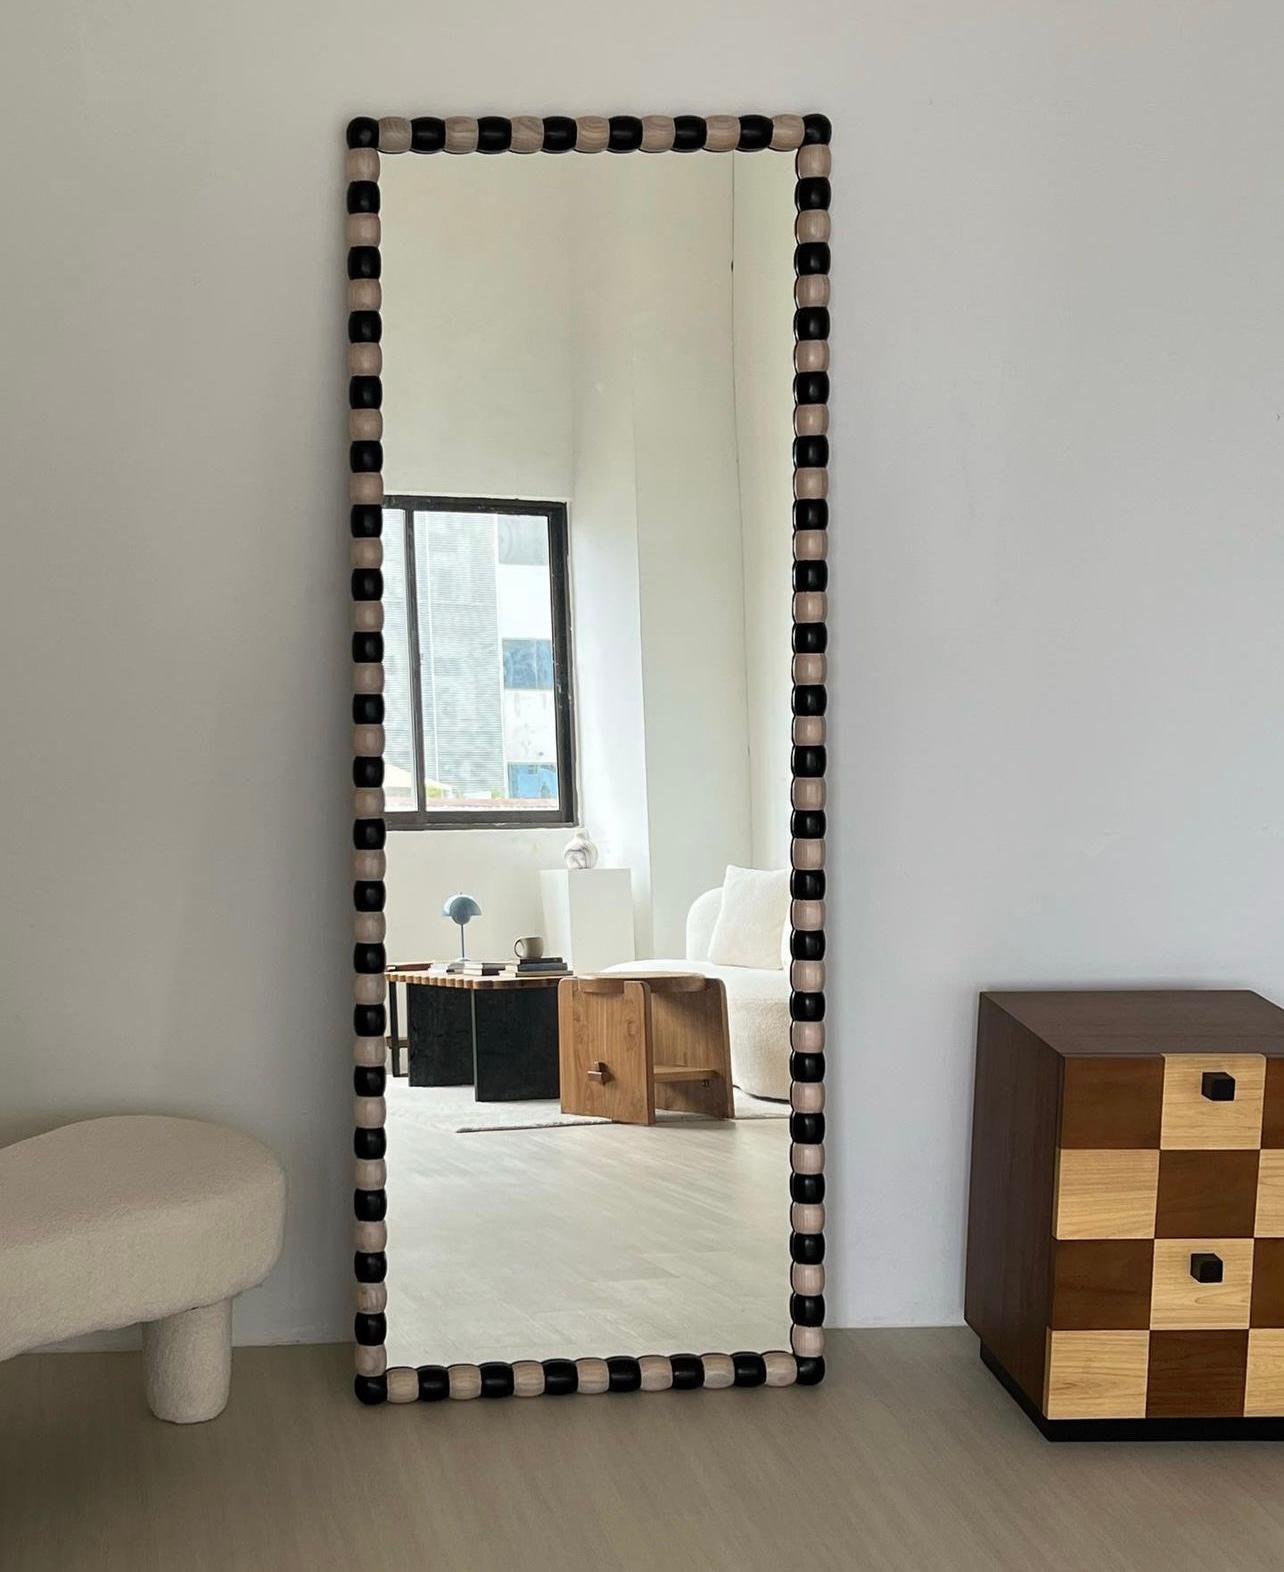 Large Onde Mirror by Studio Kallang
Dimensions: W 180 x D 5 x H 70 cm
Materials: Solid Sungkai. 

STUDIO KALLANG IS A SINGAPORE AND SEATTLE BASED PROJECT FOCUSING ON OBJECTS DESIGNED BY FAEZAH SHAHARUDDIN.
PIECES ARE PLAYFUL EXPLORATIONS IN FORM,